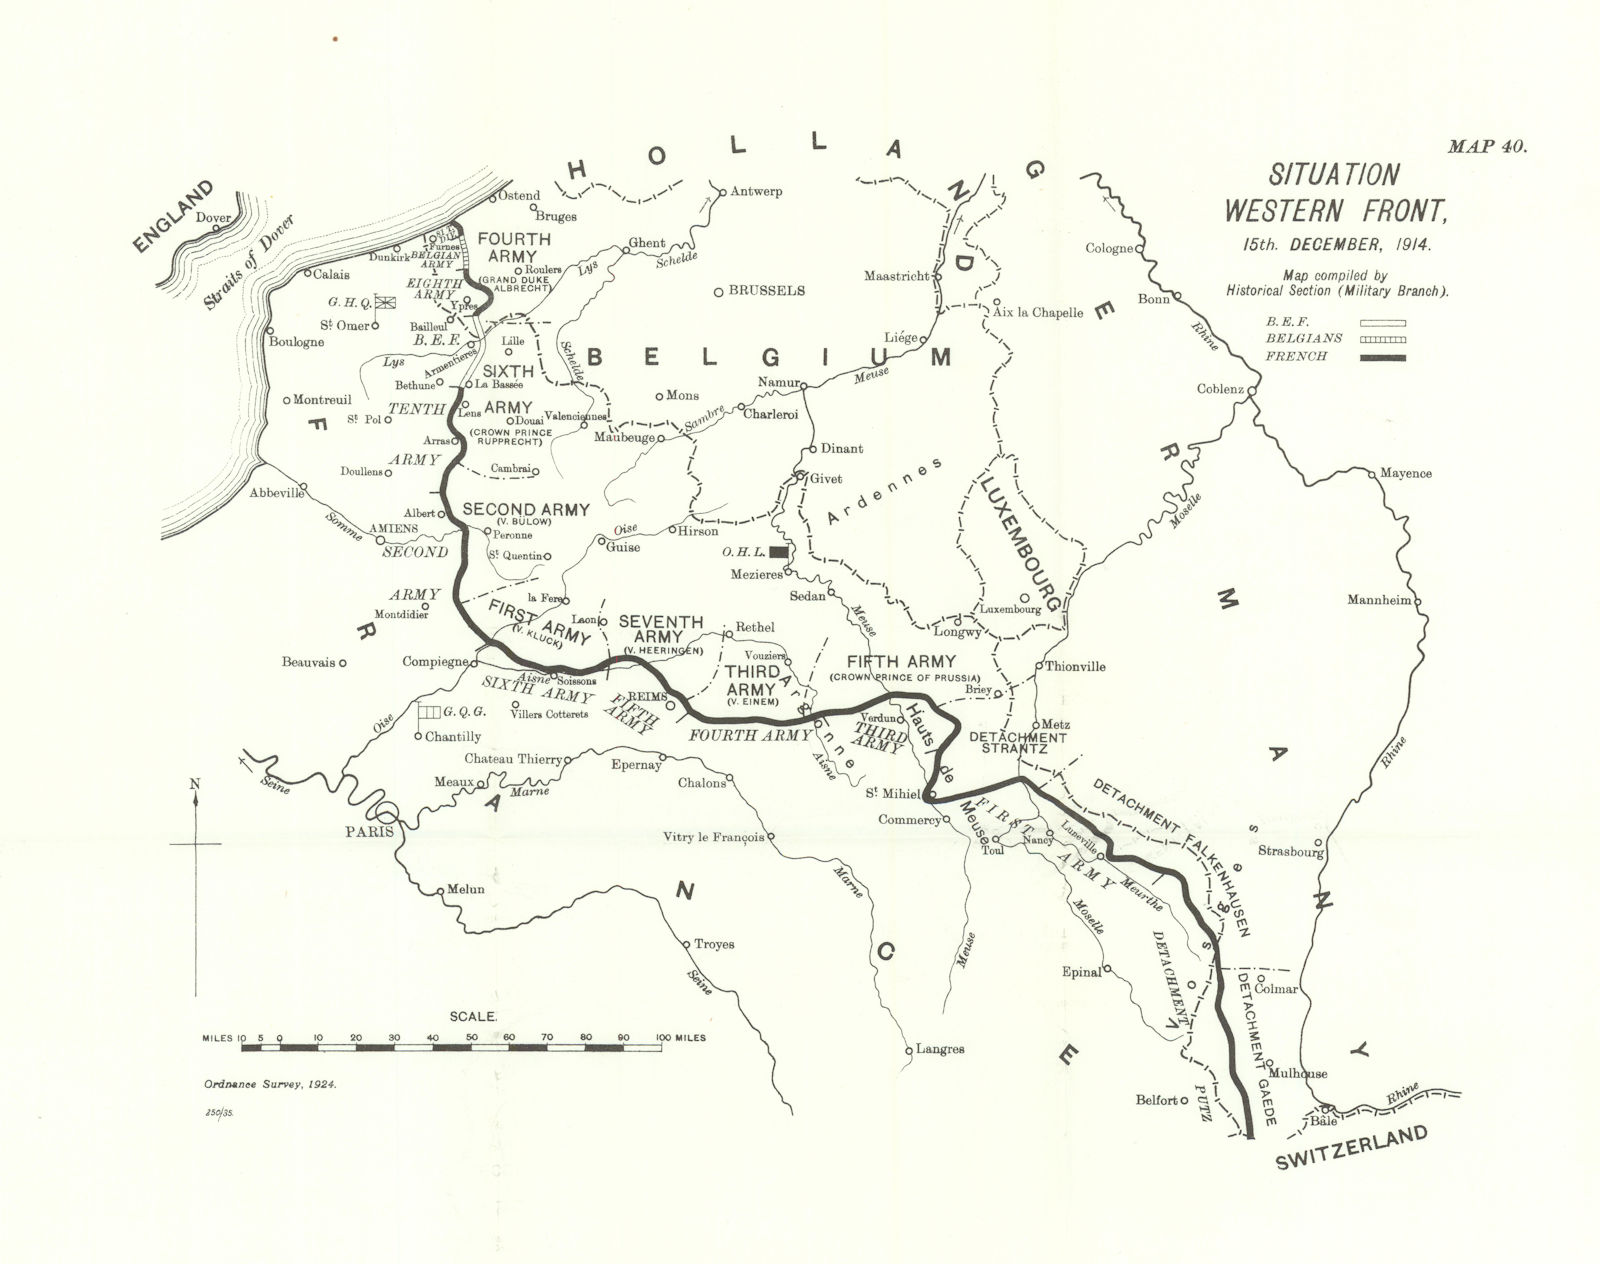 Situation Western Front, 15th December, 1914. First World War. 1933 old map